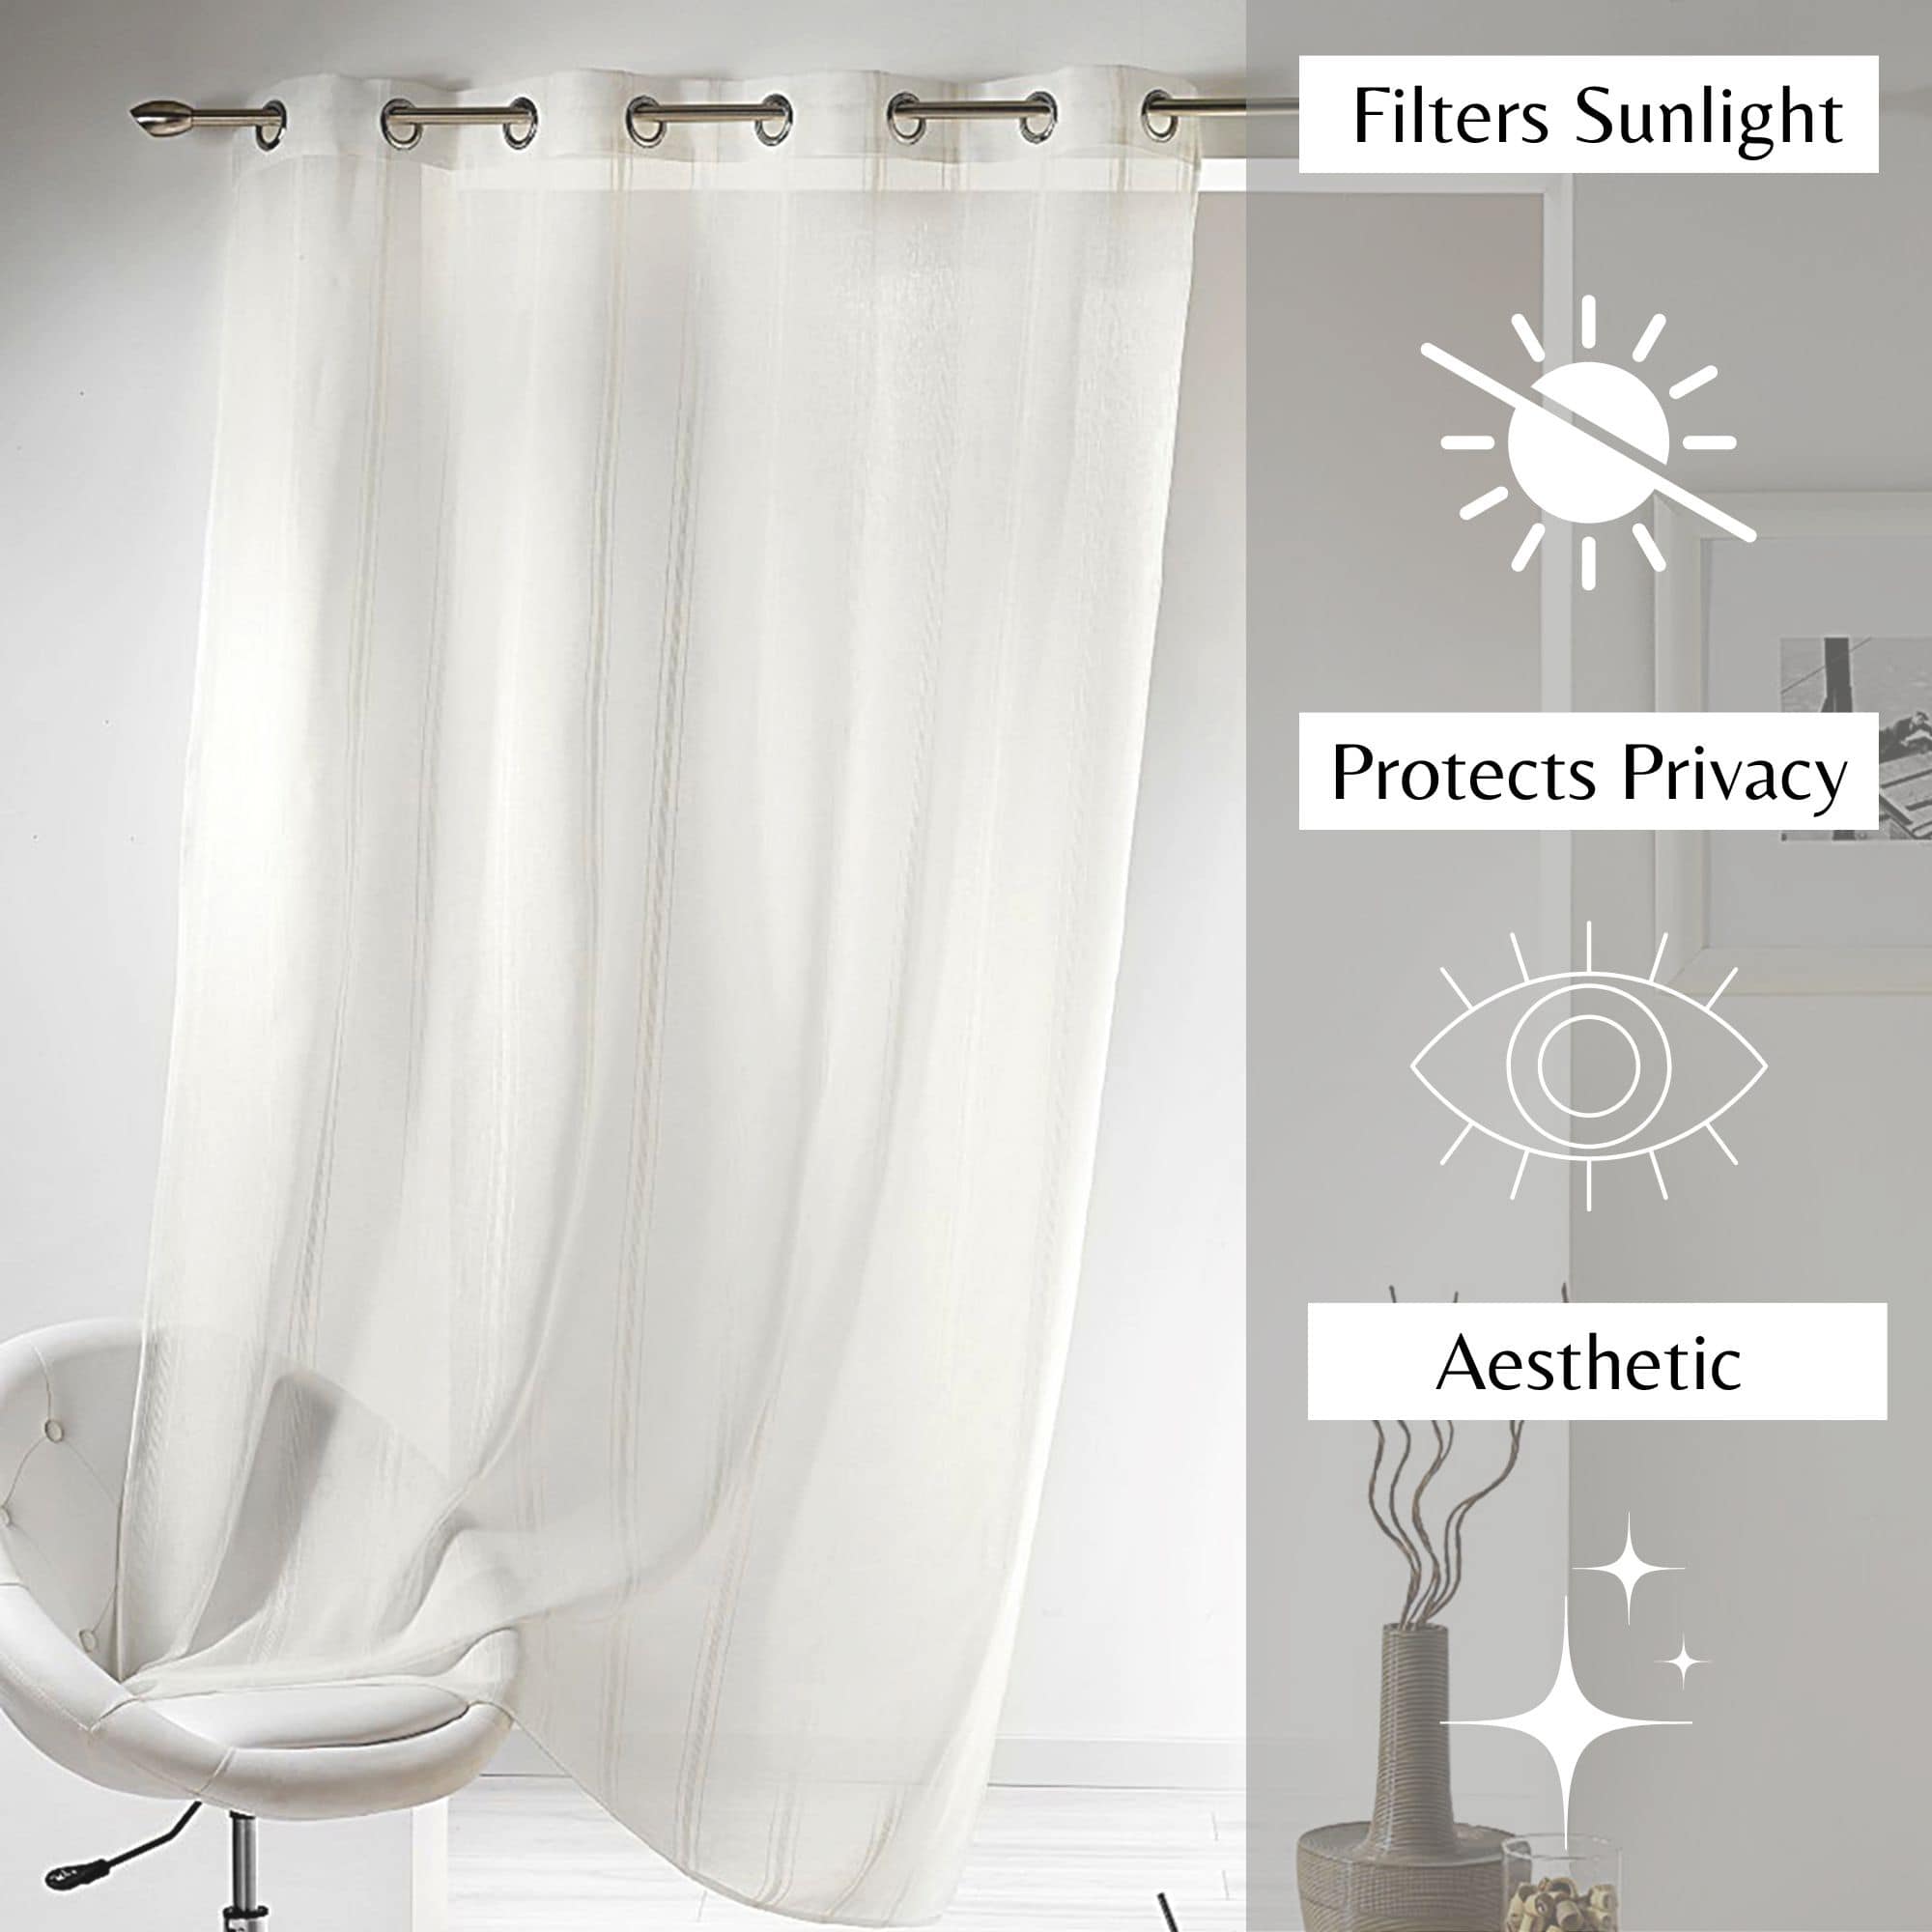 filter sunlight protect privacy aesthetic dual sheer voiles for home decor